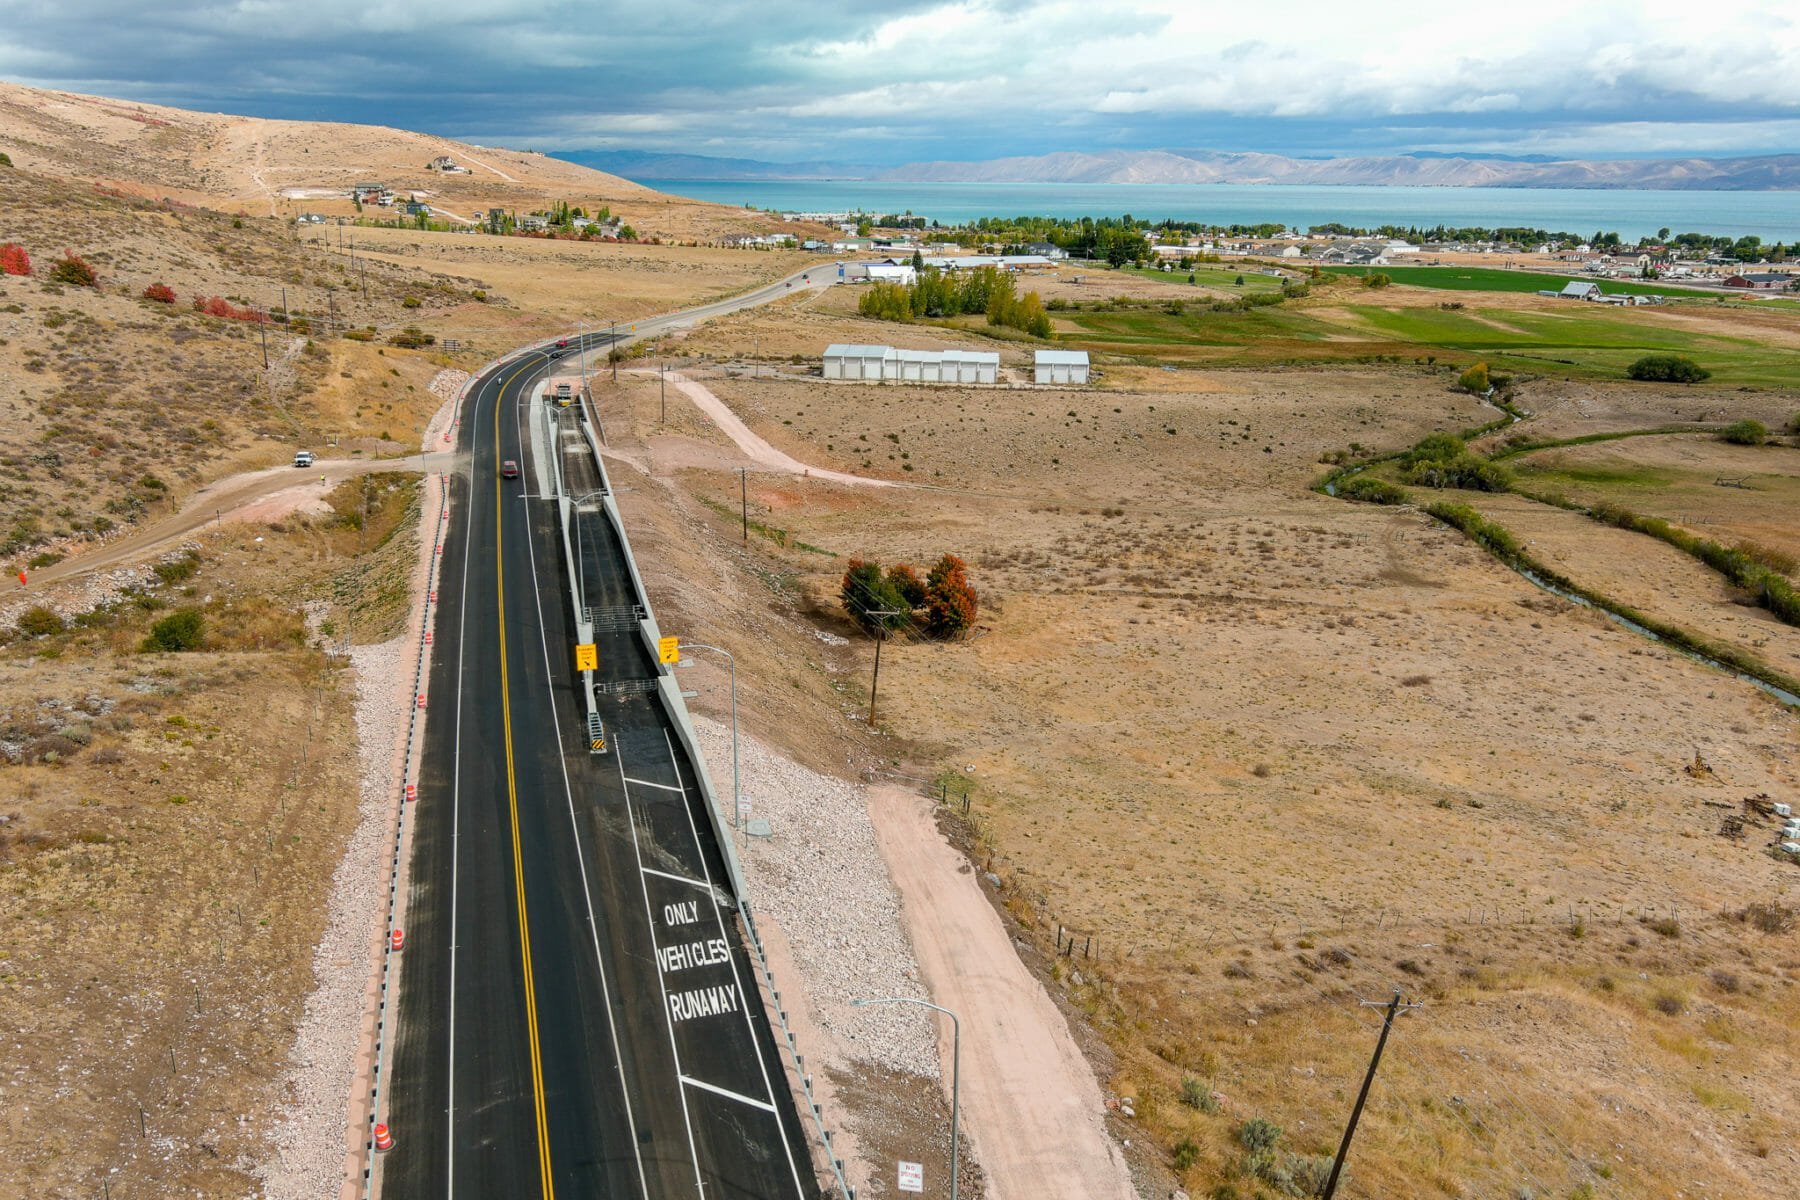 Utah AGC 2020 Specialty Construction Project – Highway/Transportation Division